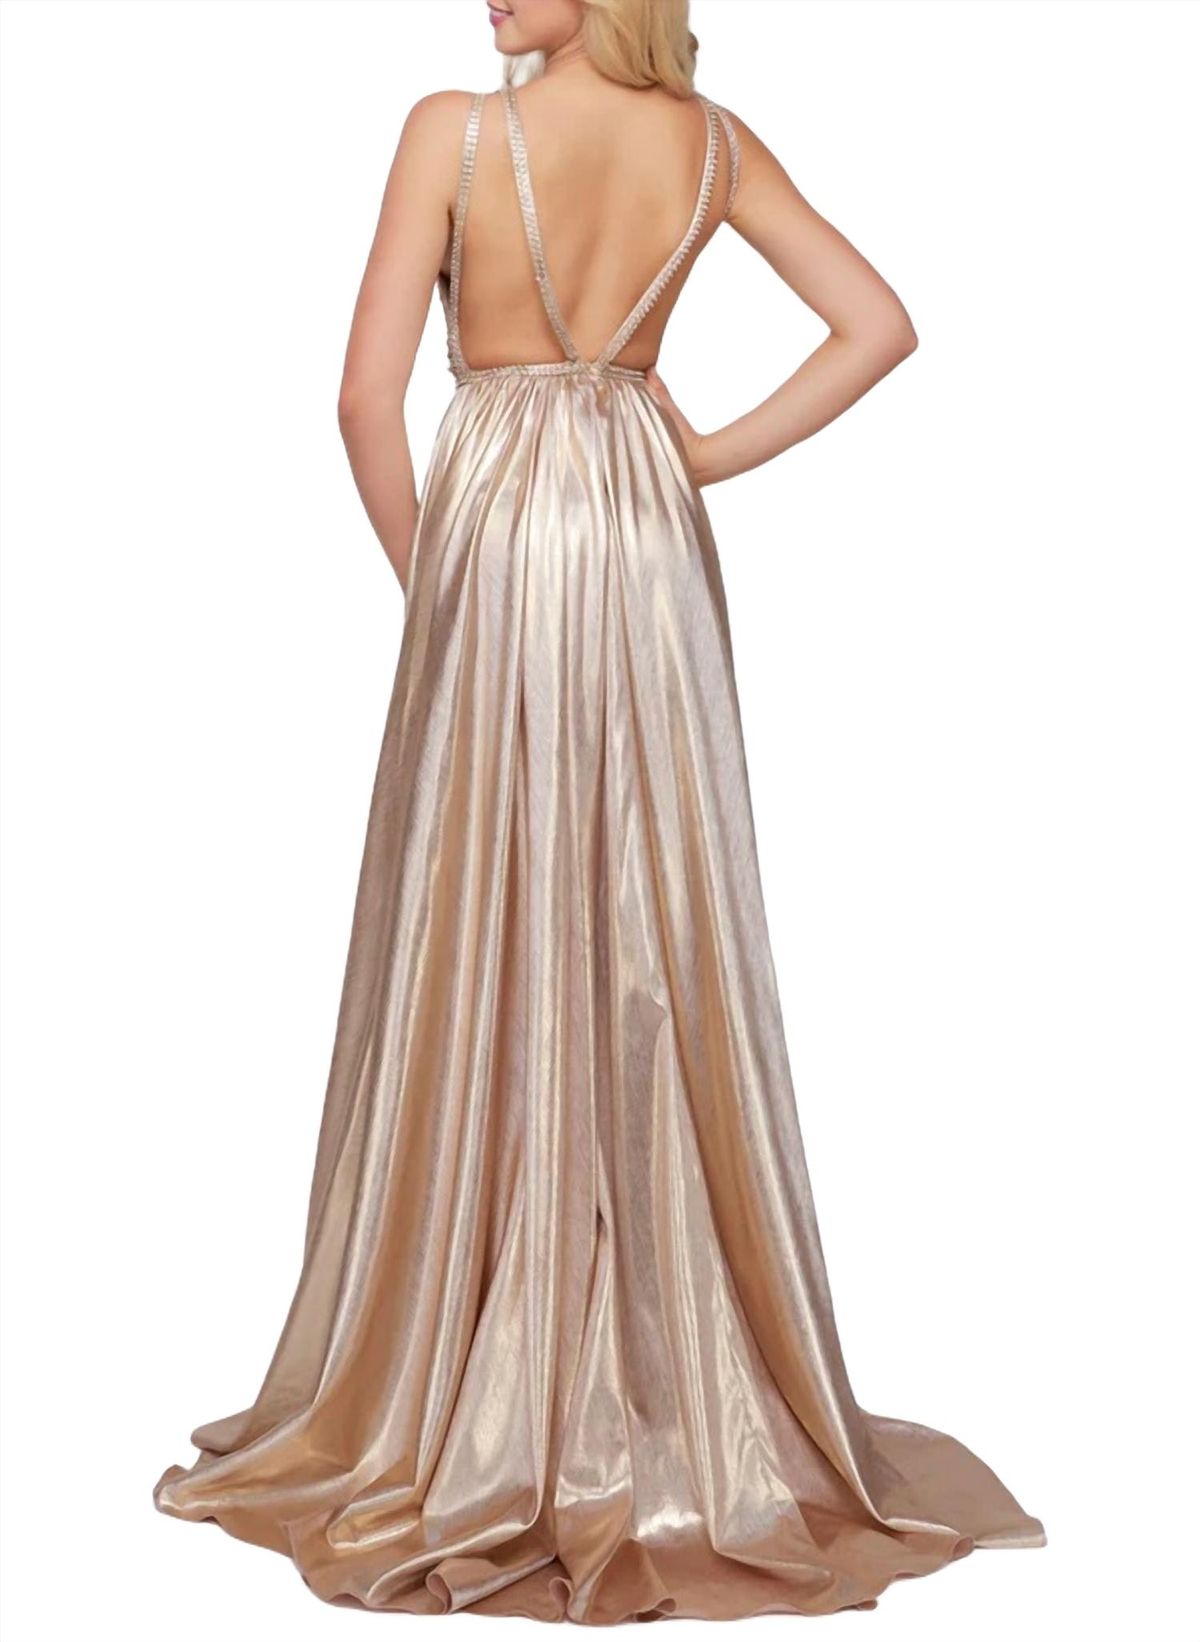 Style 1-3063648626-1498 MAC DUGGAL Size 4 Prom Plunge Sequined Gold Side Slit Dress on Queenly